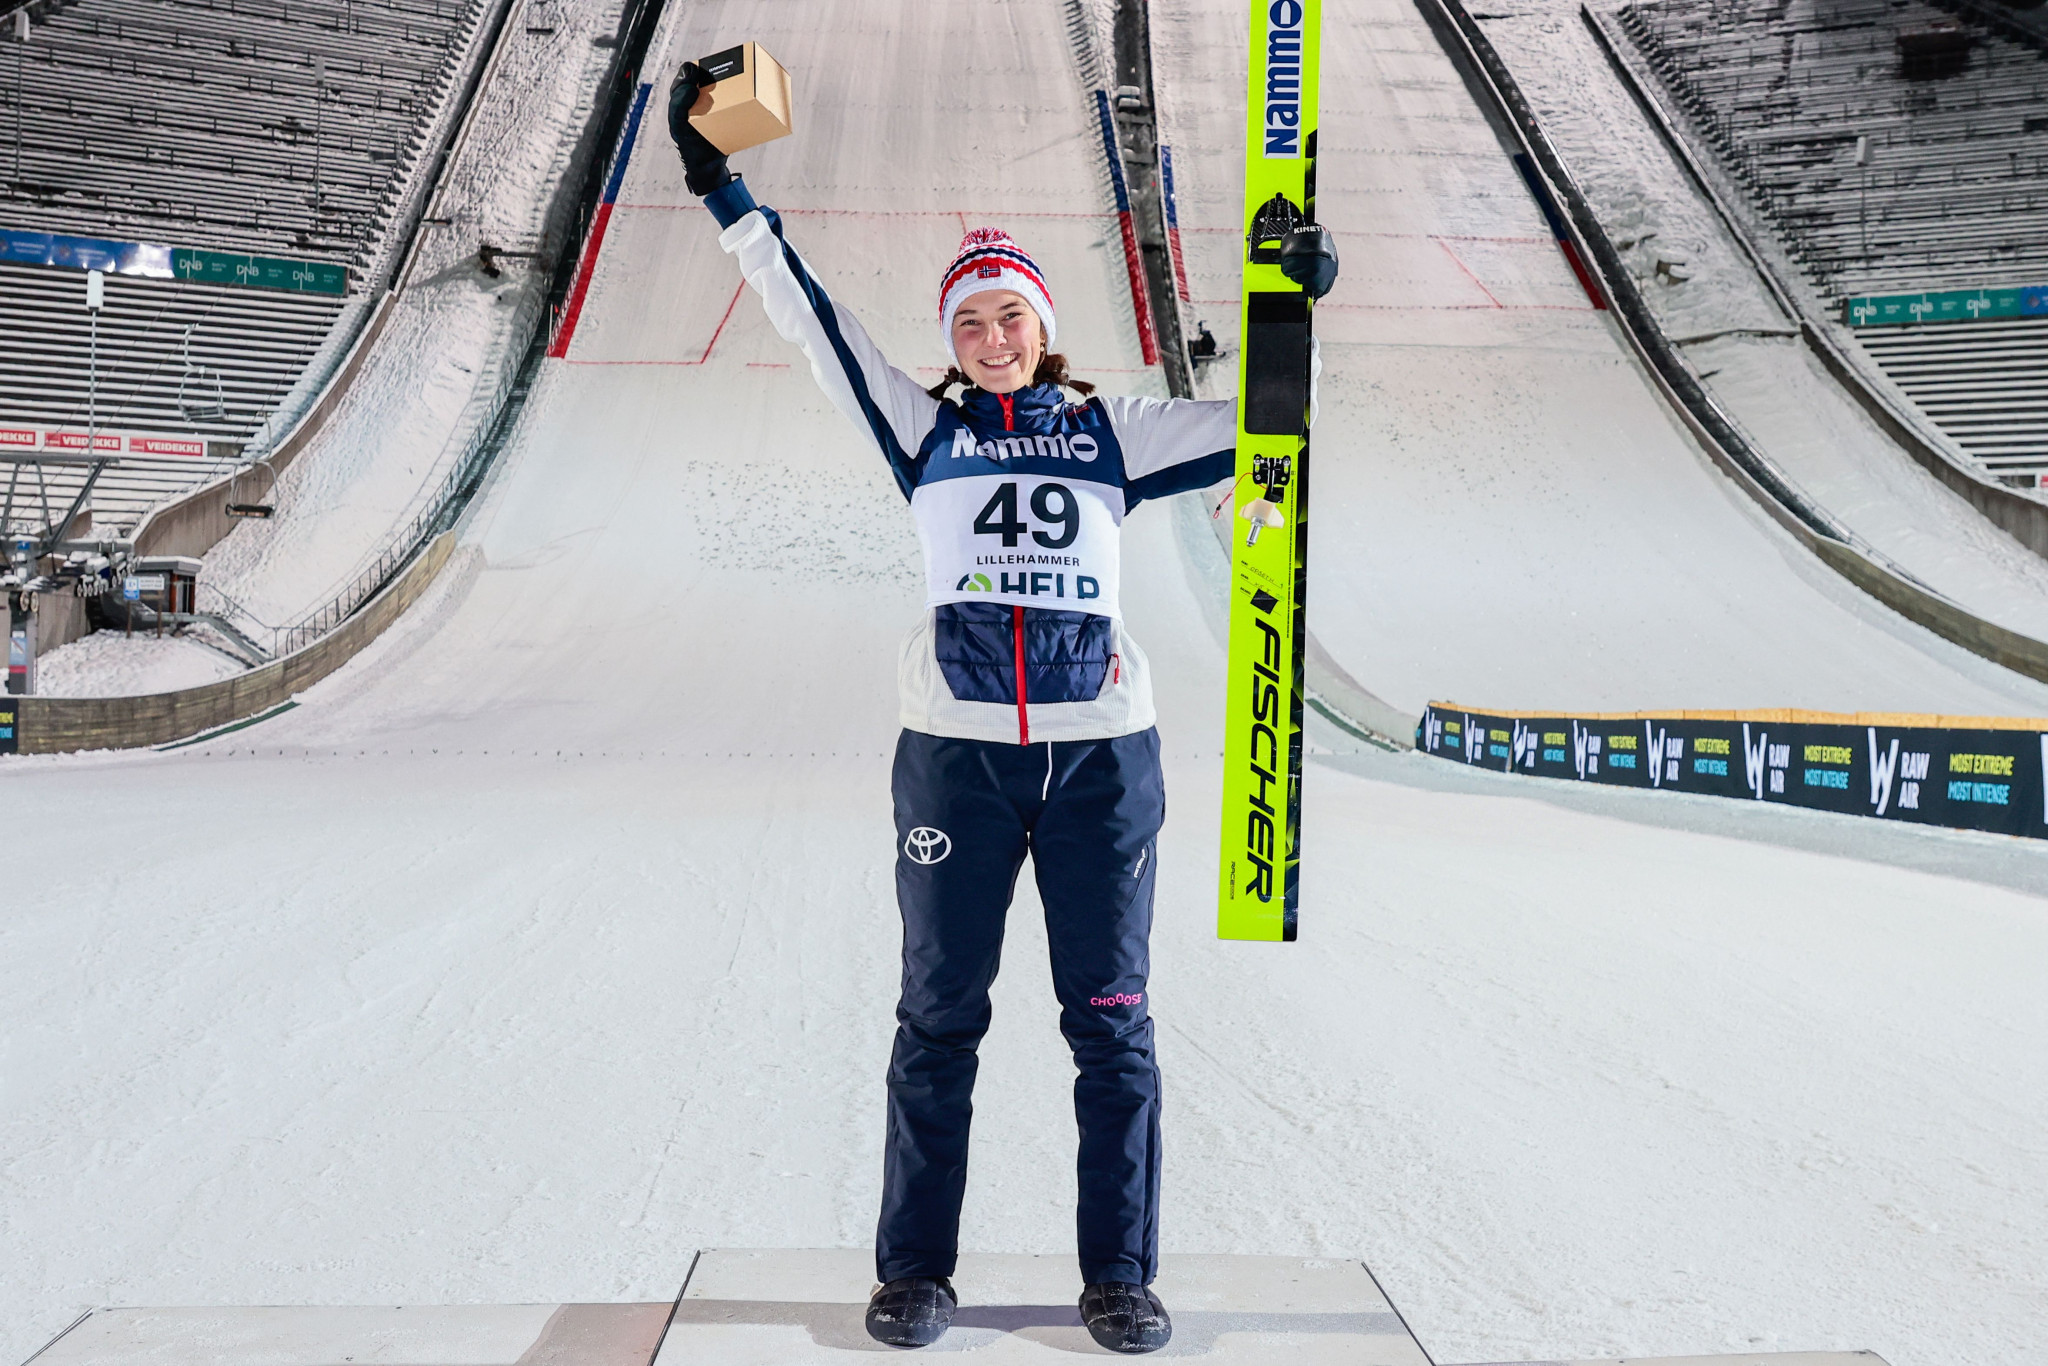 Opseth leads Norwegian one-two at women's Ski Jumping World Cup in Lillehammer